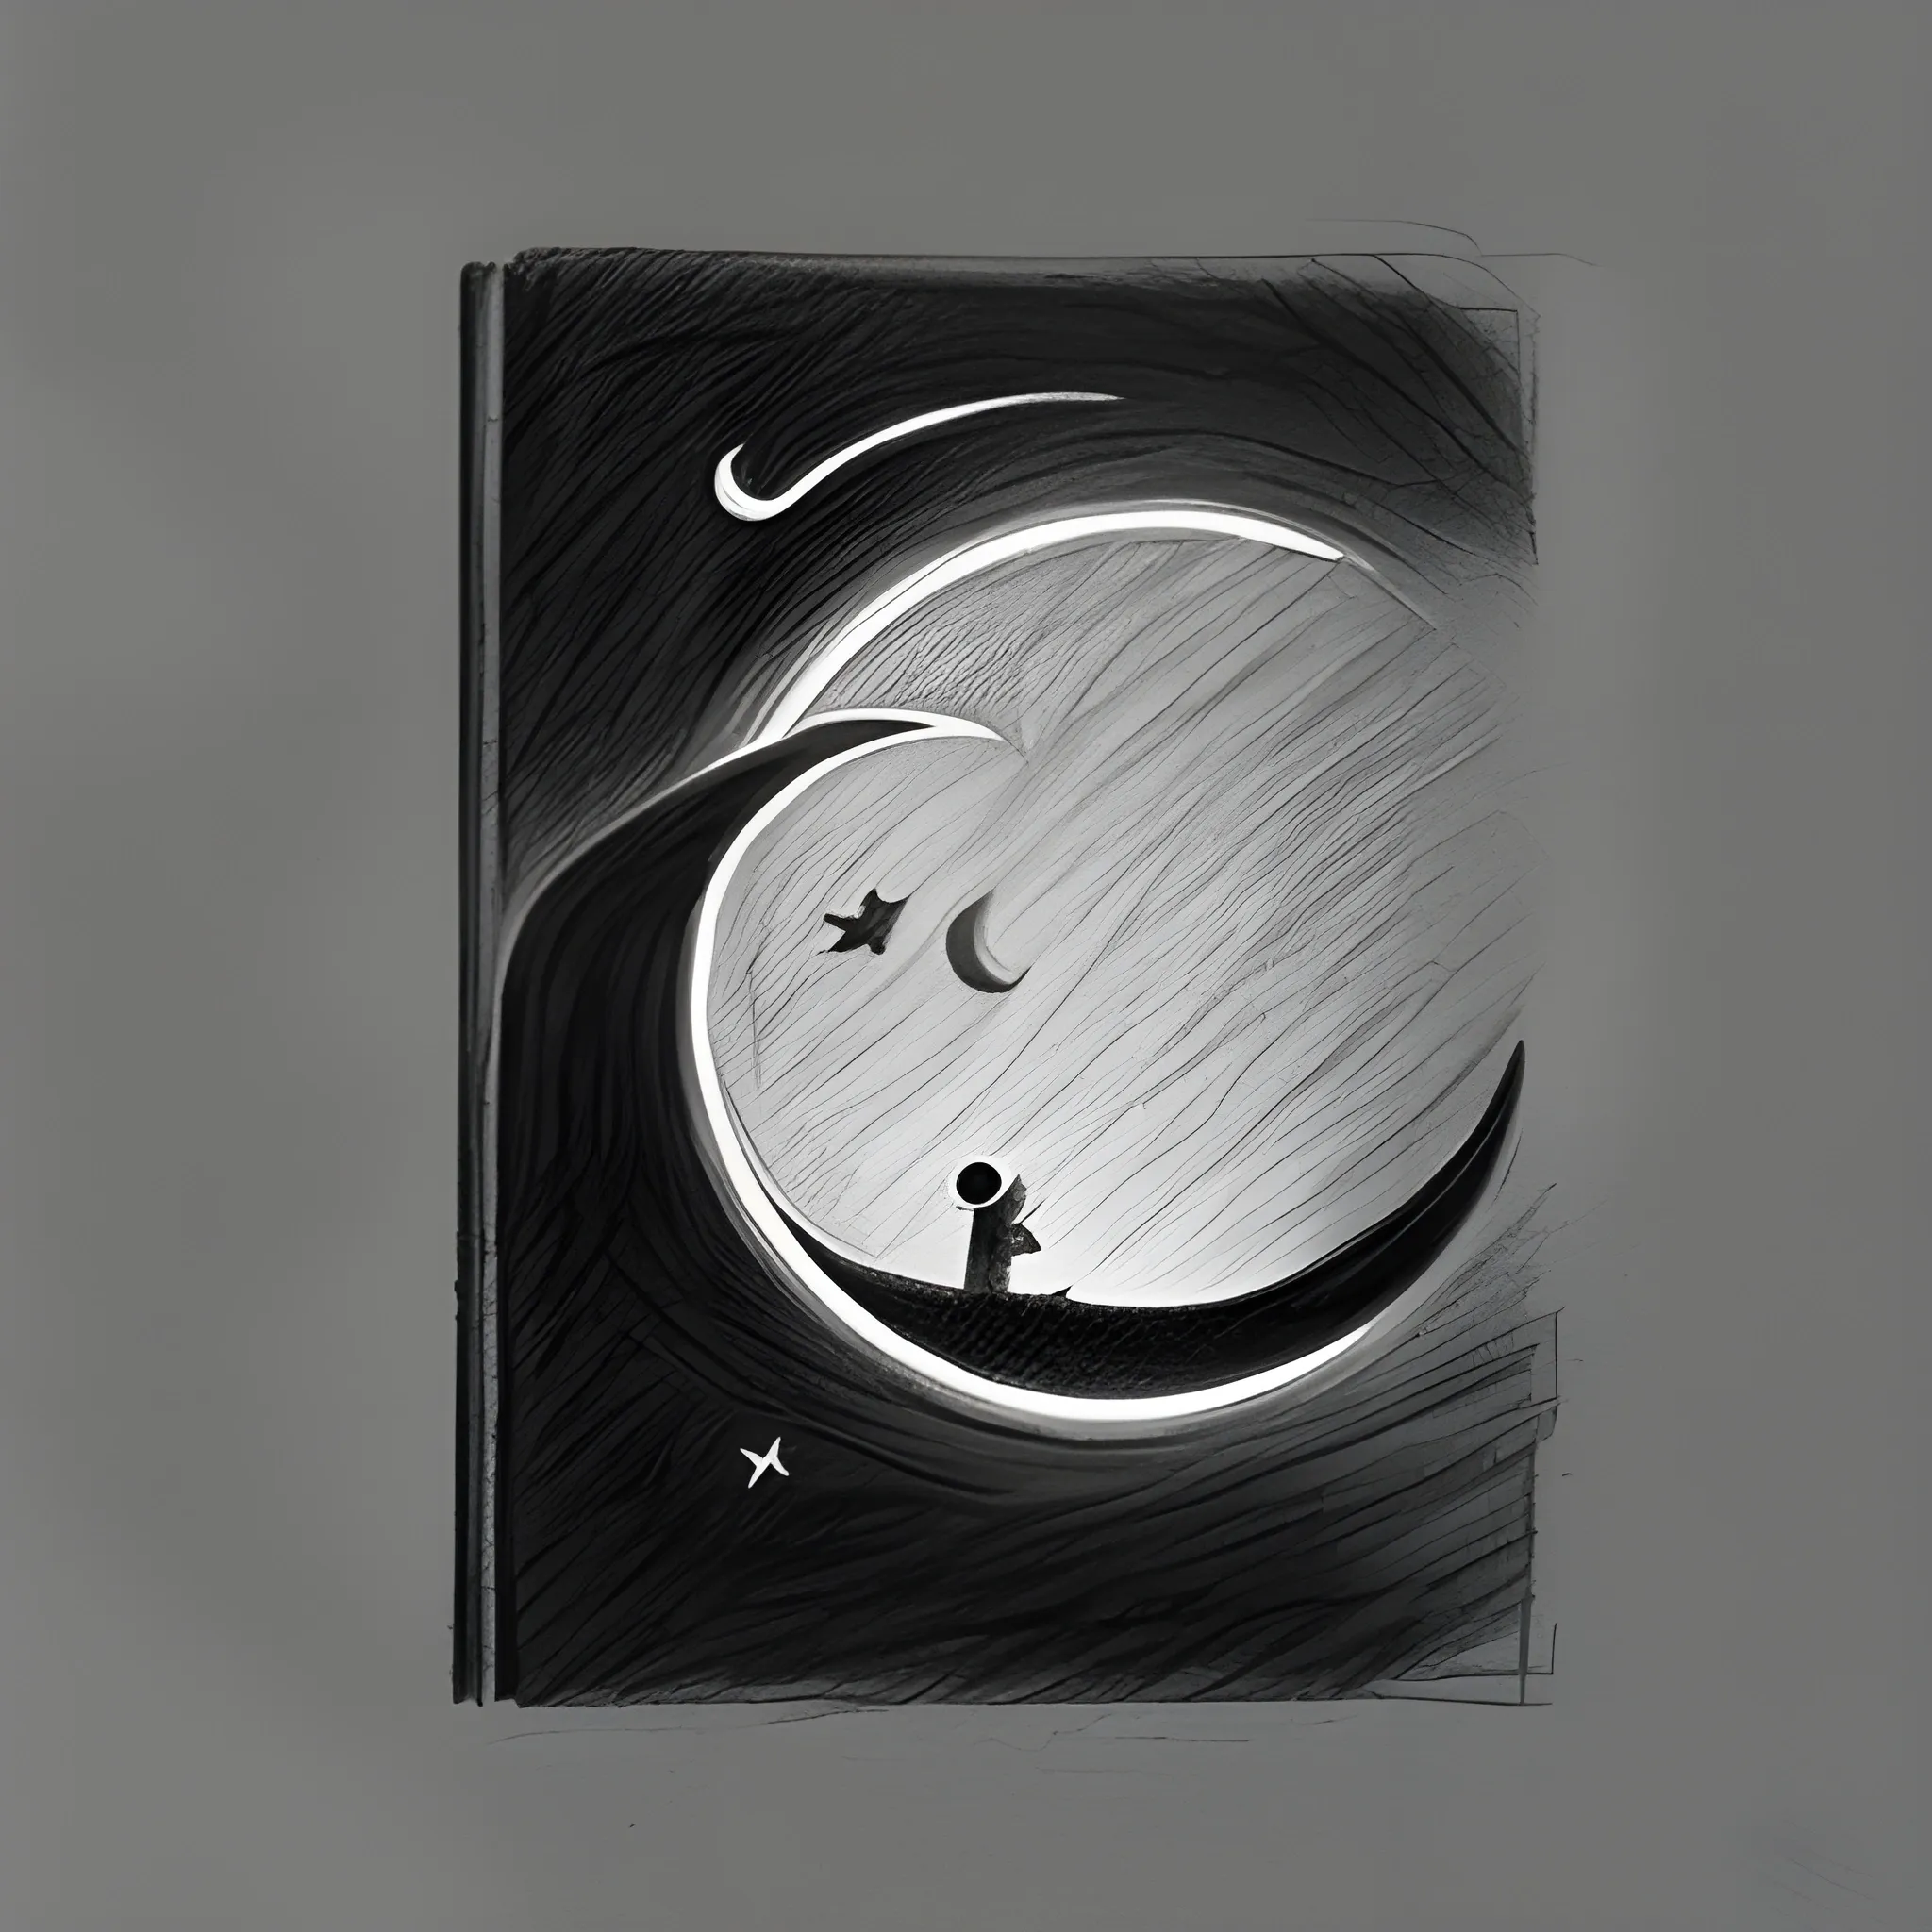 pencil sketch of a book entitled " see you on a dark night" with a crescent moon